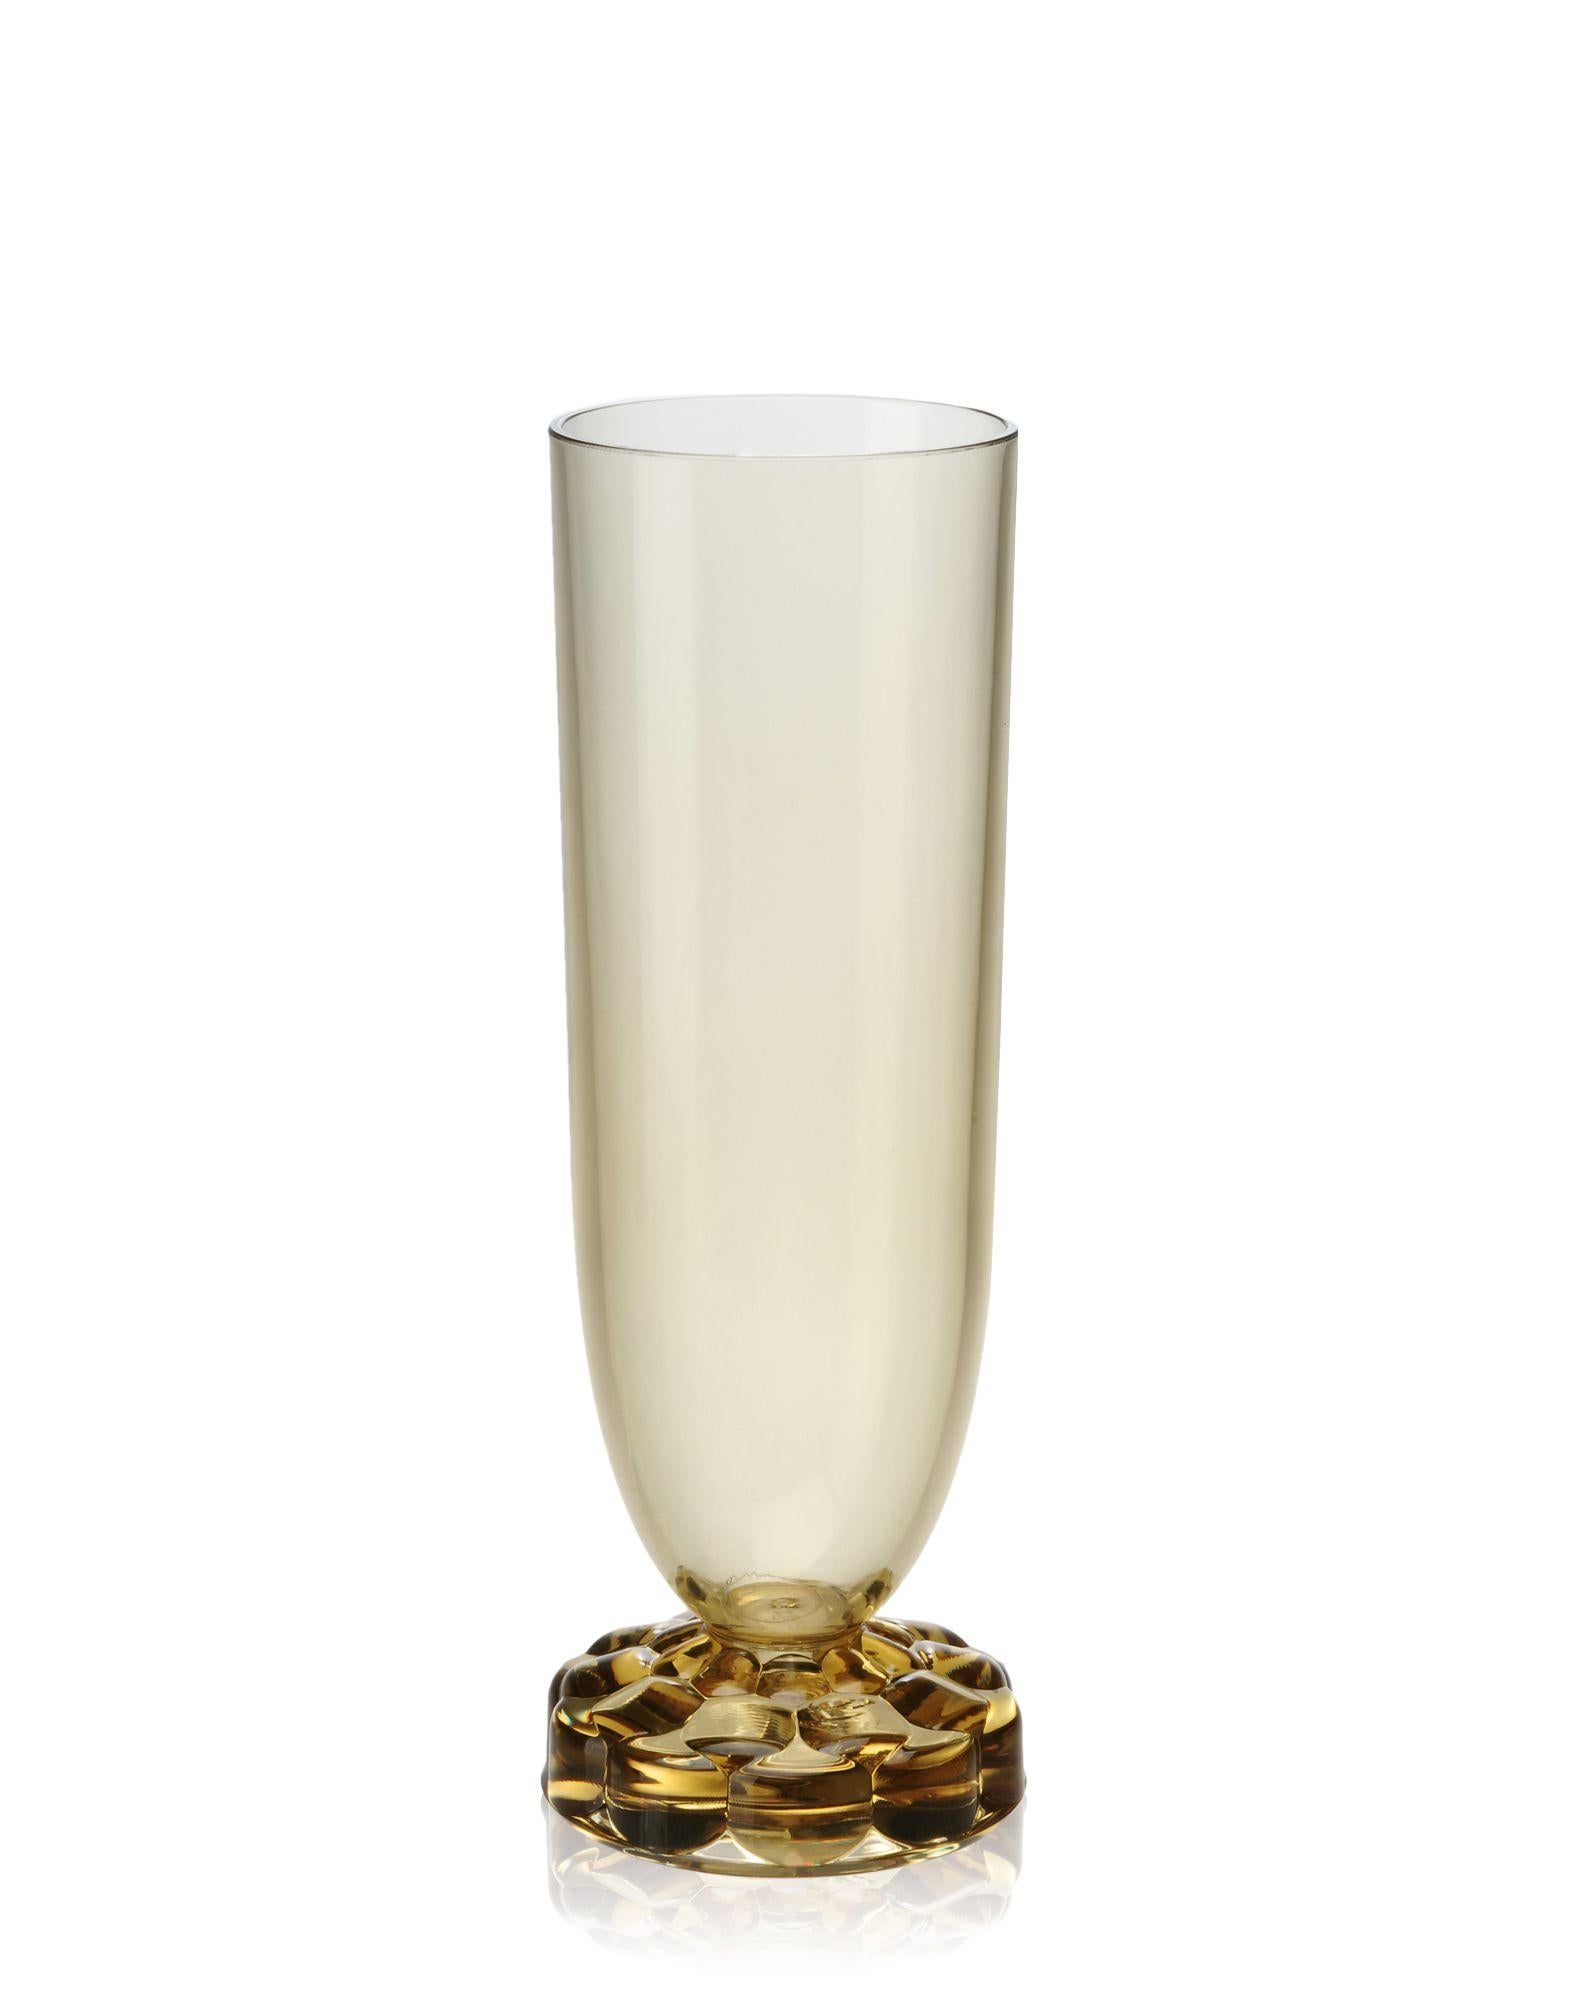 The jellies family tableware line has been expanded to include new items designed especially for the Christmas holidays and for ringing in the new year, the jellies champagne flute.

Dimensions: Height 6.75 in.; Diameter 2.13 in.; Unit weight: